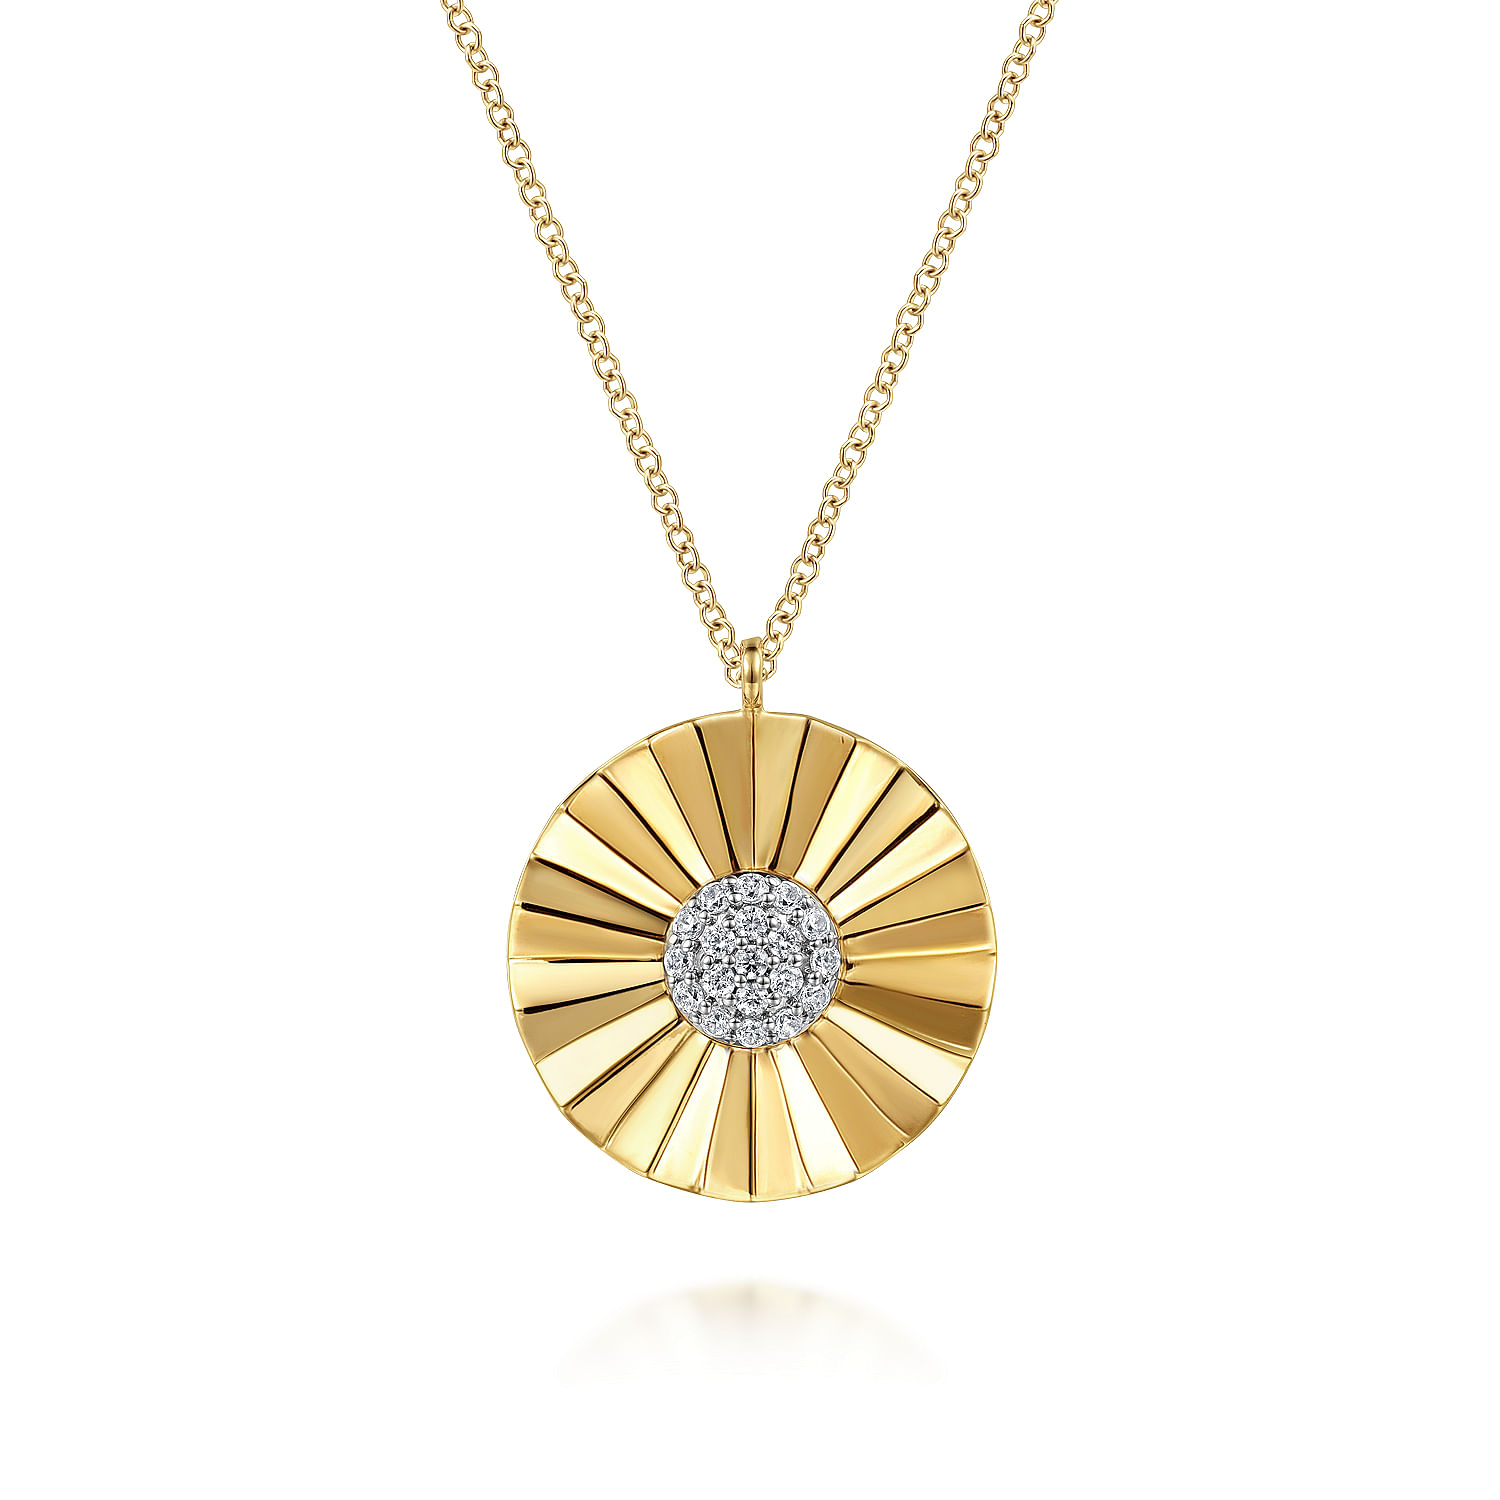 Gabriel - 14K White and Yellow Gold Diamond Round Shape Necklace with Diamond Cut Texture